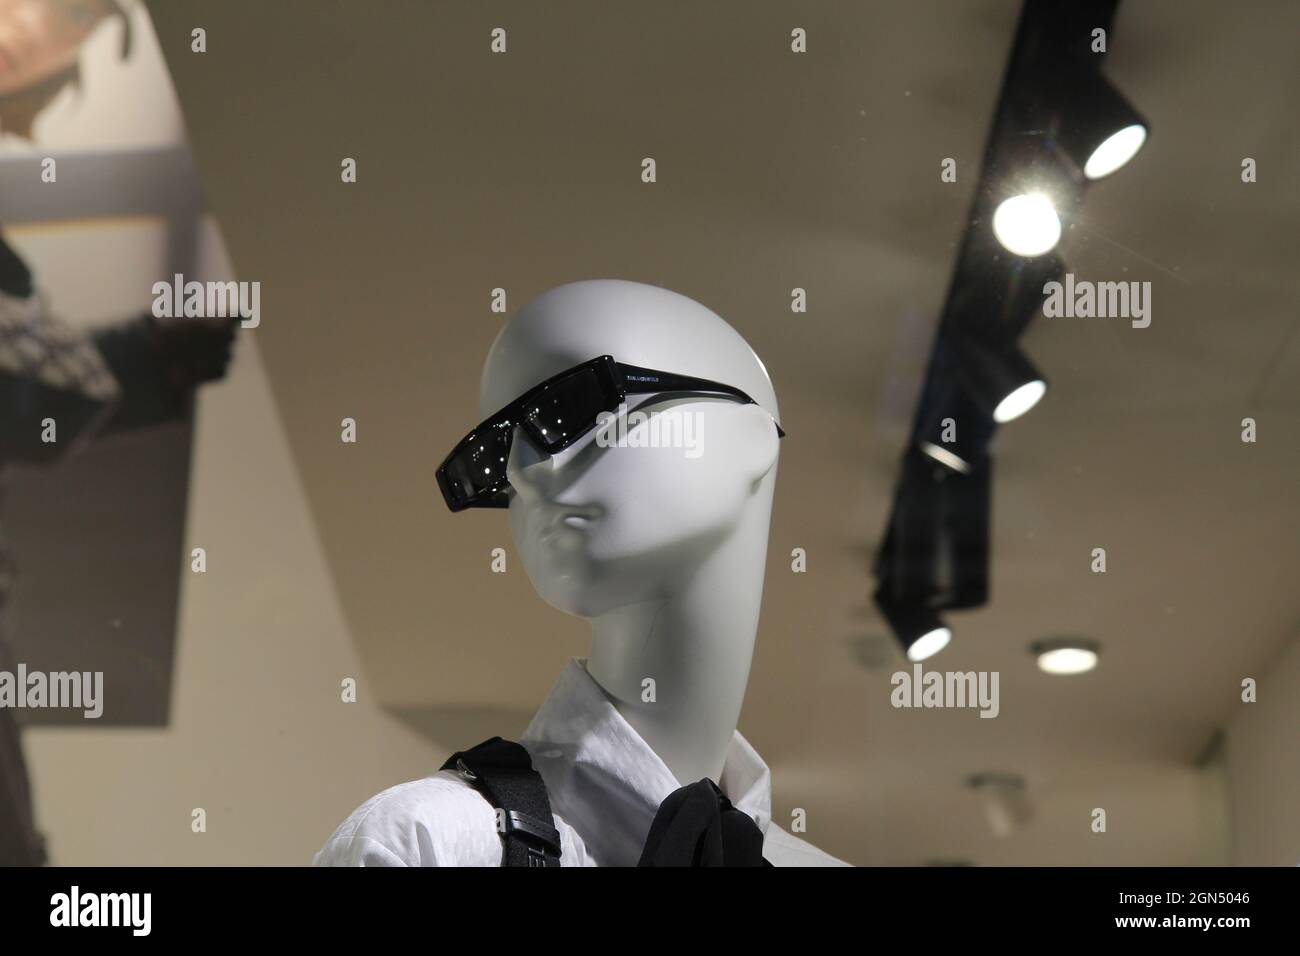 Display dummy, head with sunglasses, Karl Lagerfeld glasses. Stock Photo